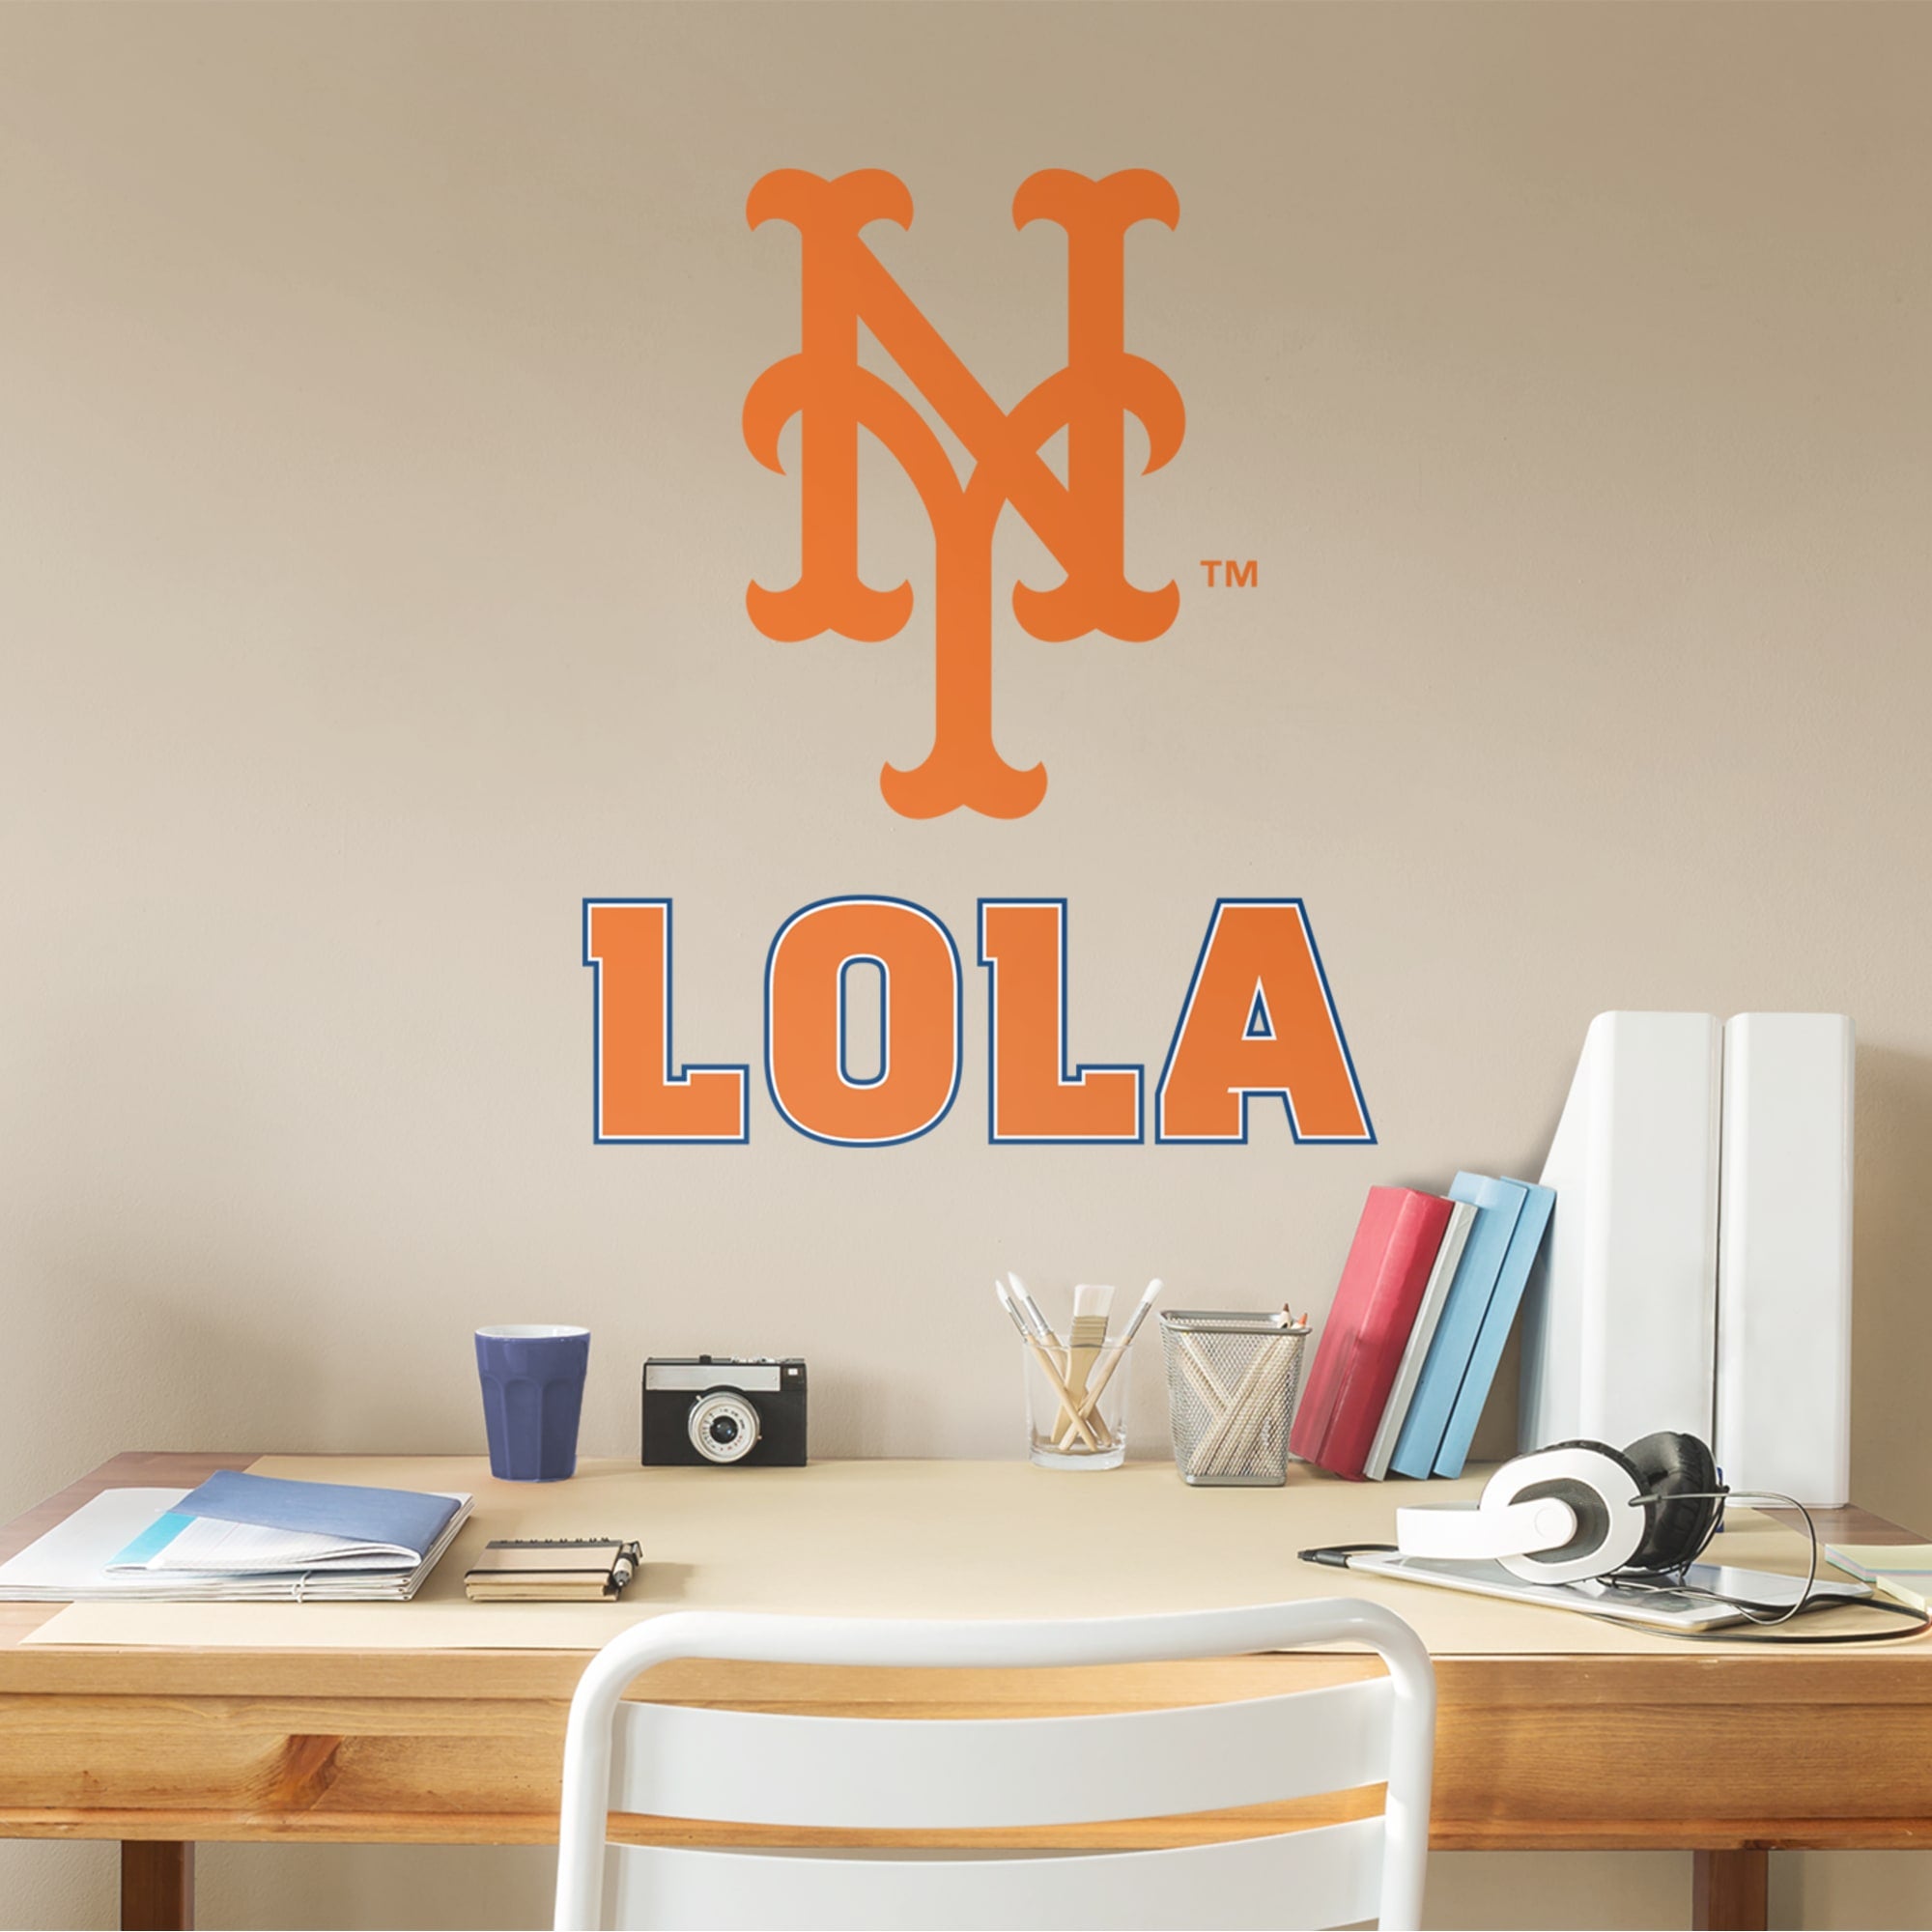 New York Mets: Stacked "NY" Personalized Name - Officially Licensed MLB Transfer Decal in Orange (52"W x 39.5"H) by Fathead | Vi